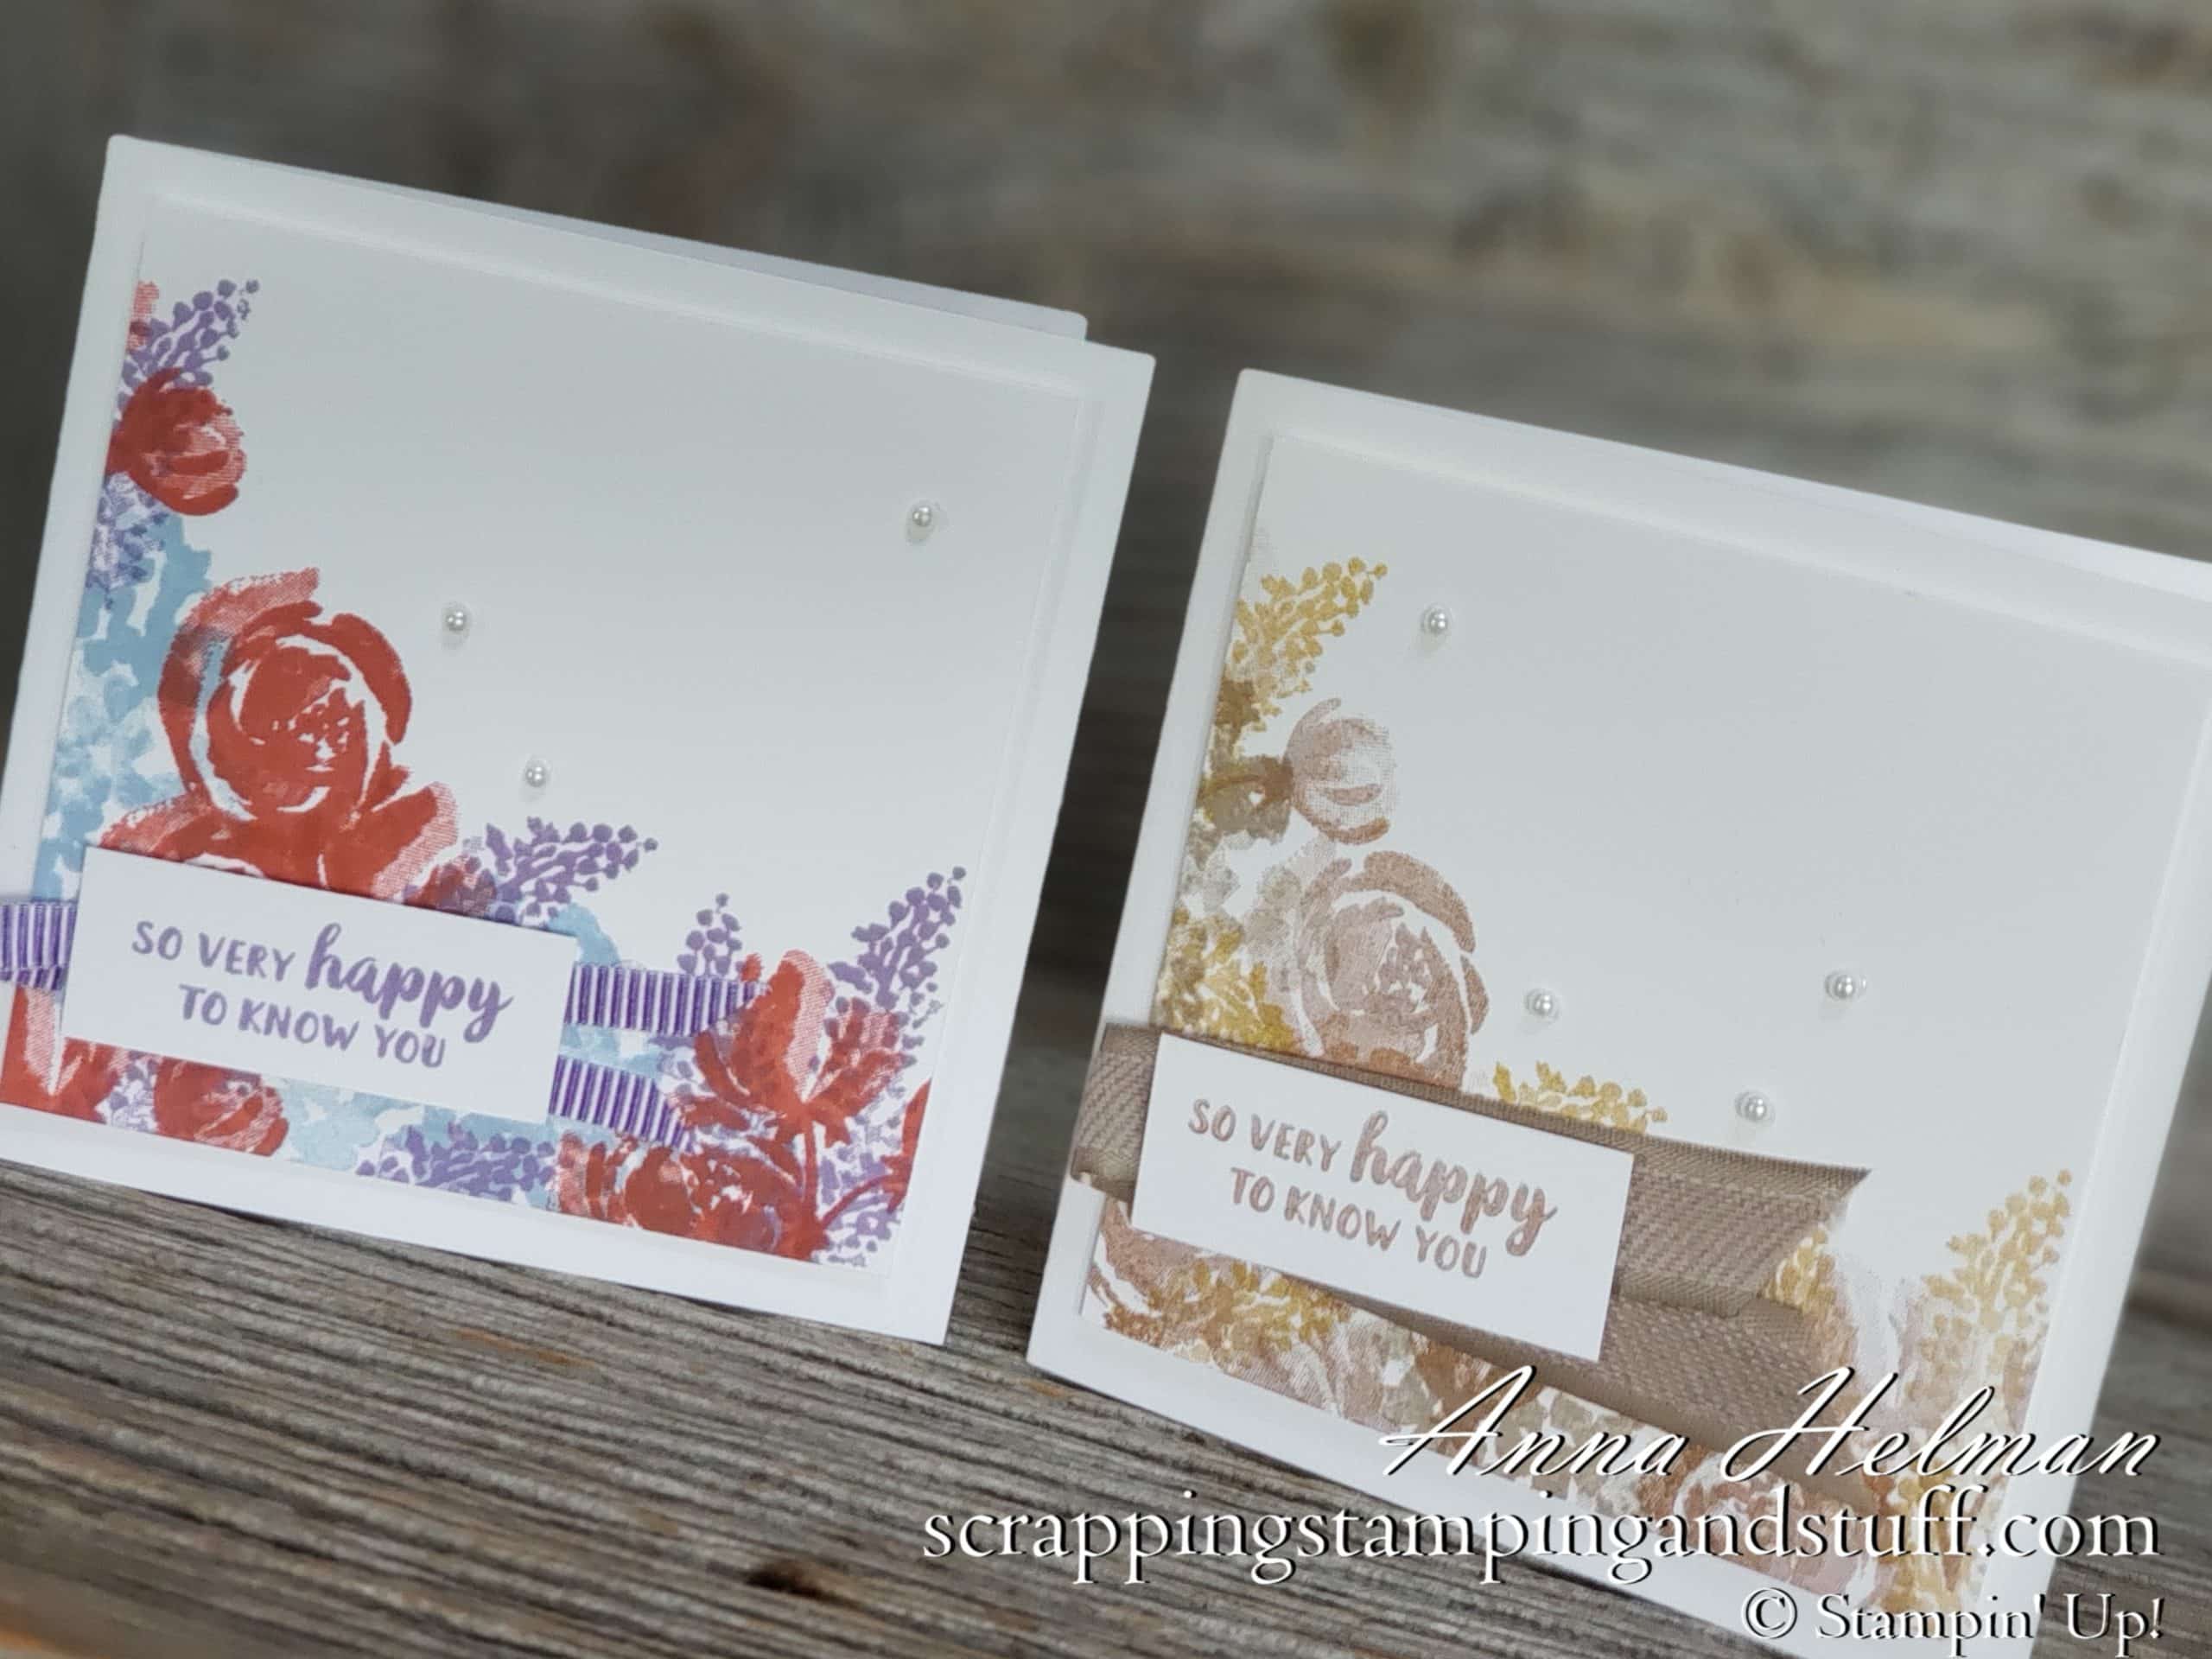 New Metallic Ink Pads and a Beautiful Friendship Card